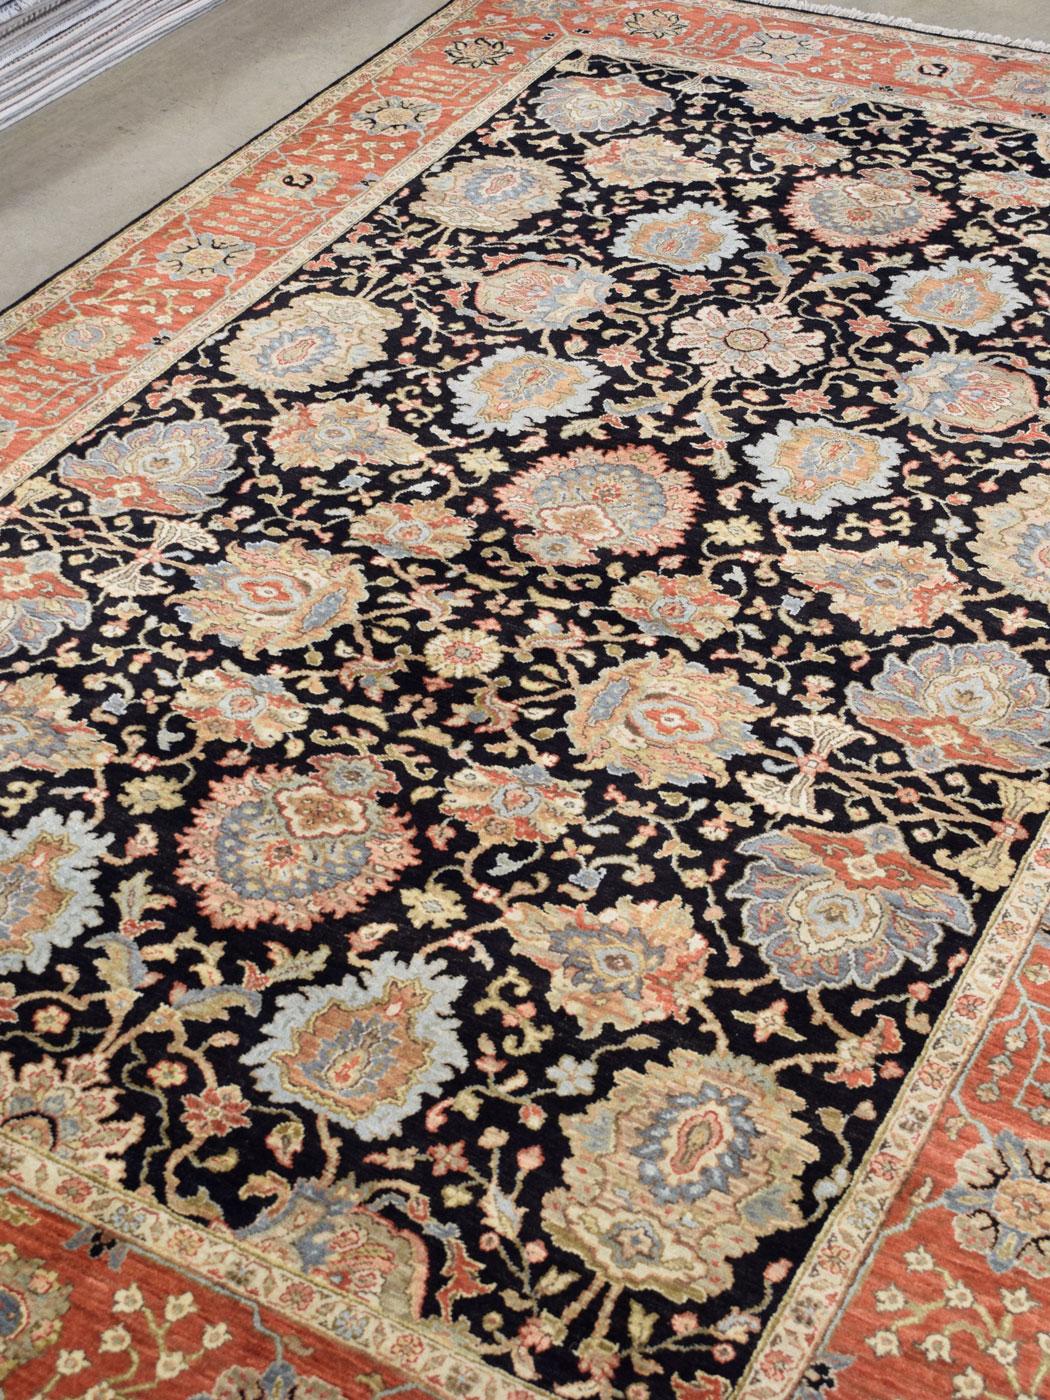 Warm, dramatic, and pleasantly inviting, this wool Agra carpet measures 6’ x 9’1” and is hand-knotted in red-orange, black, gray, pink, and gold wool. Crafted in India circa 2016 and created using a Persian-inspired weave, this carpet is in new